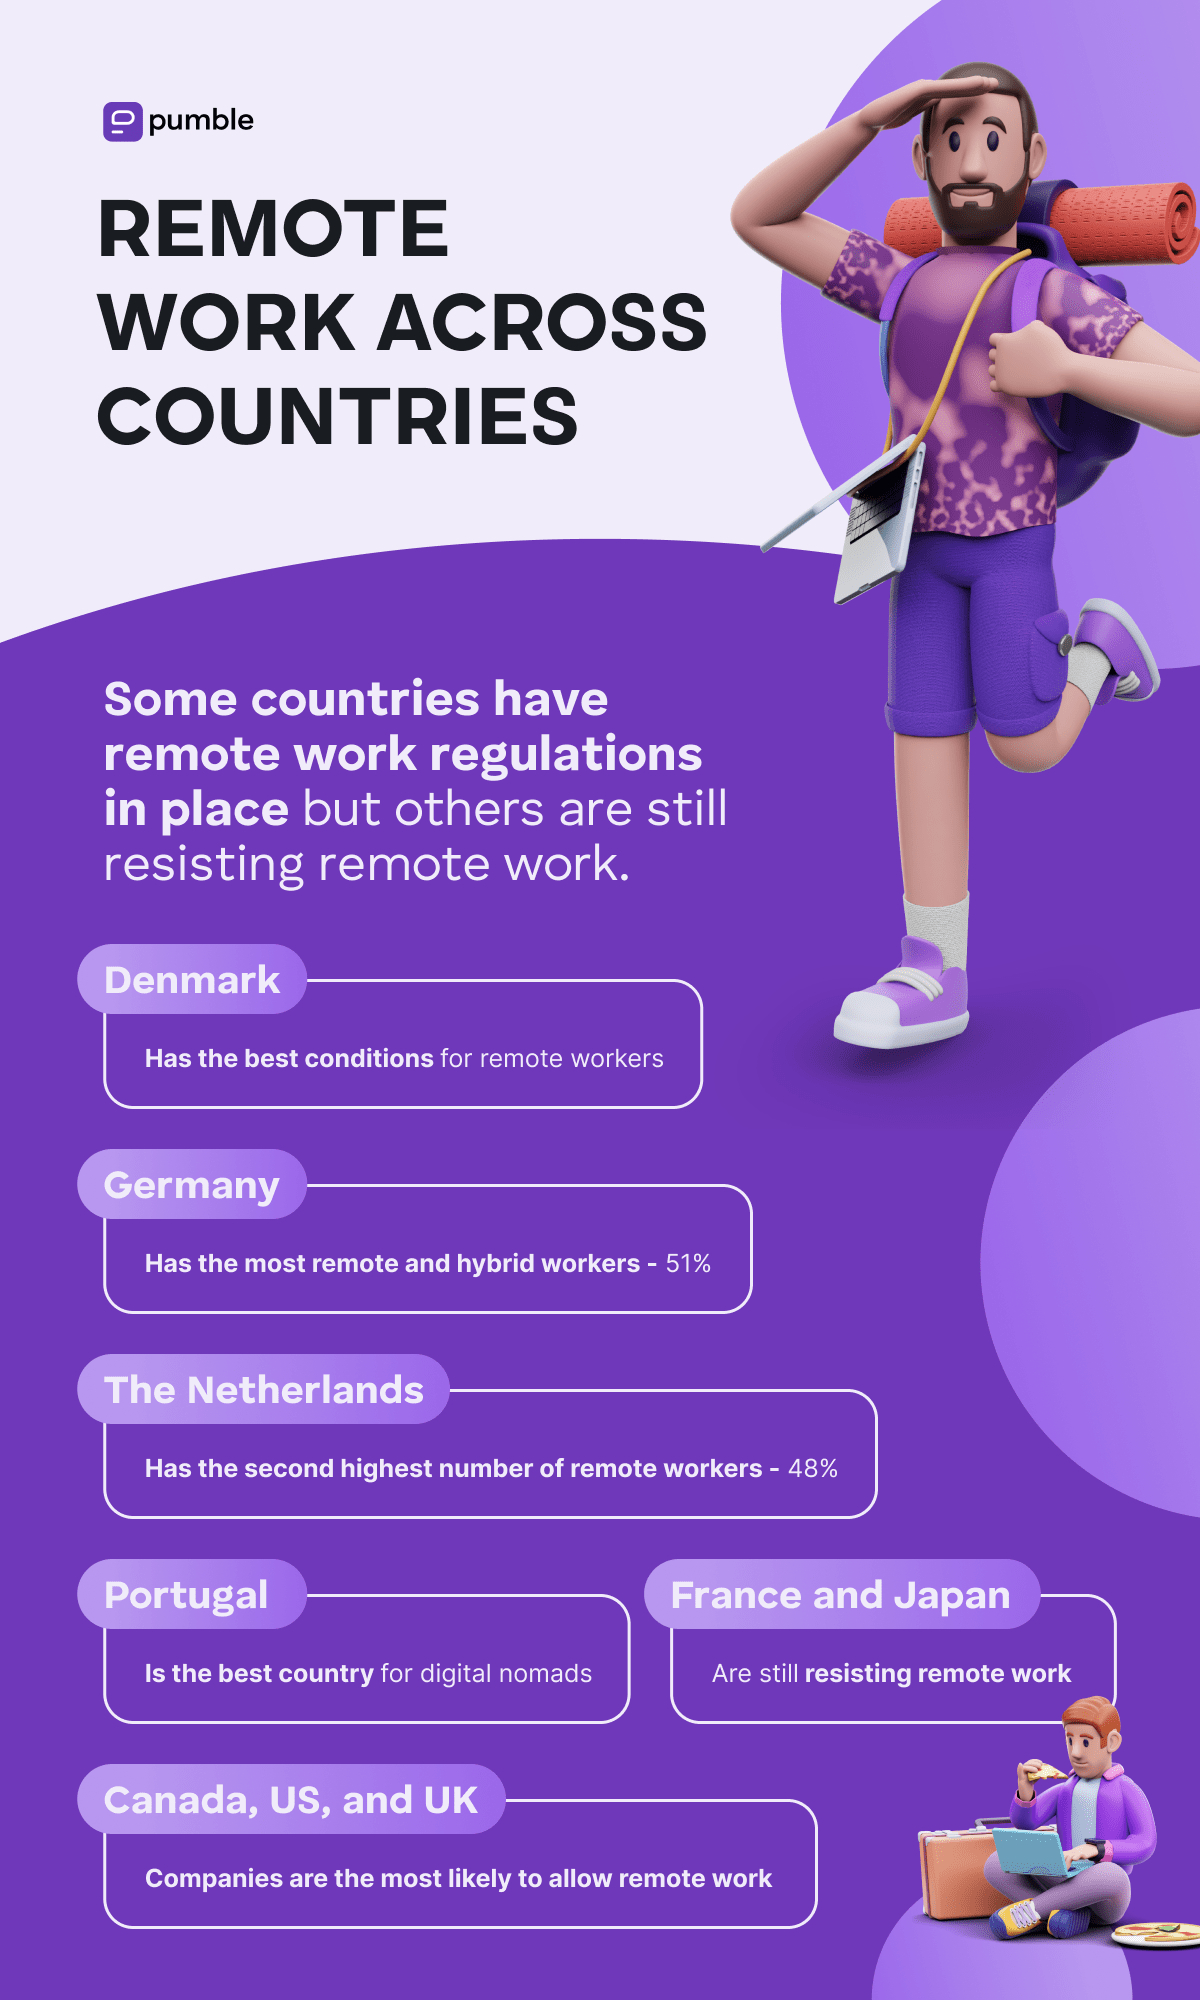 Remote work across countries 
